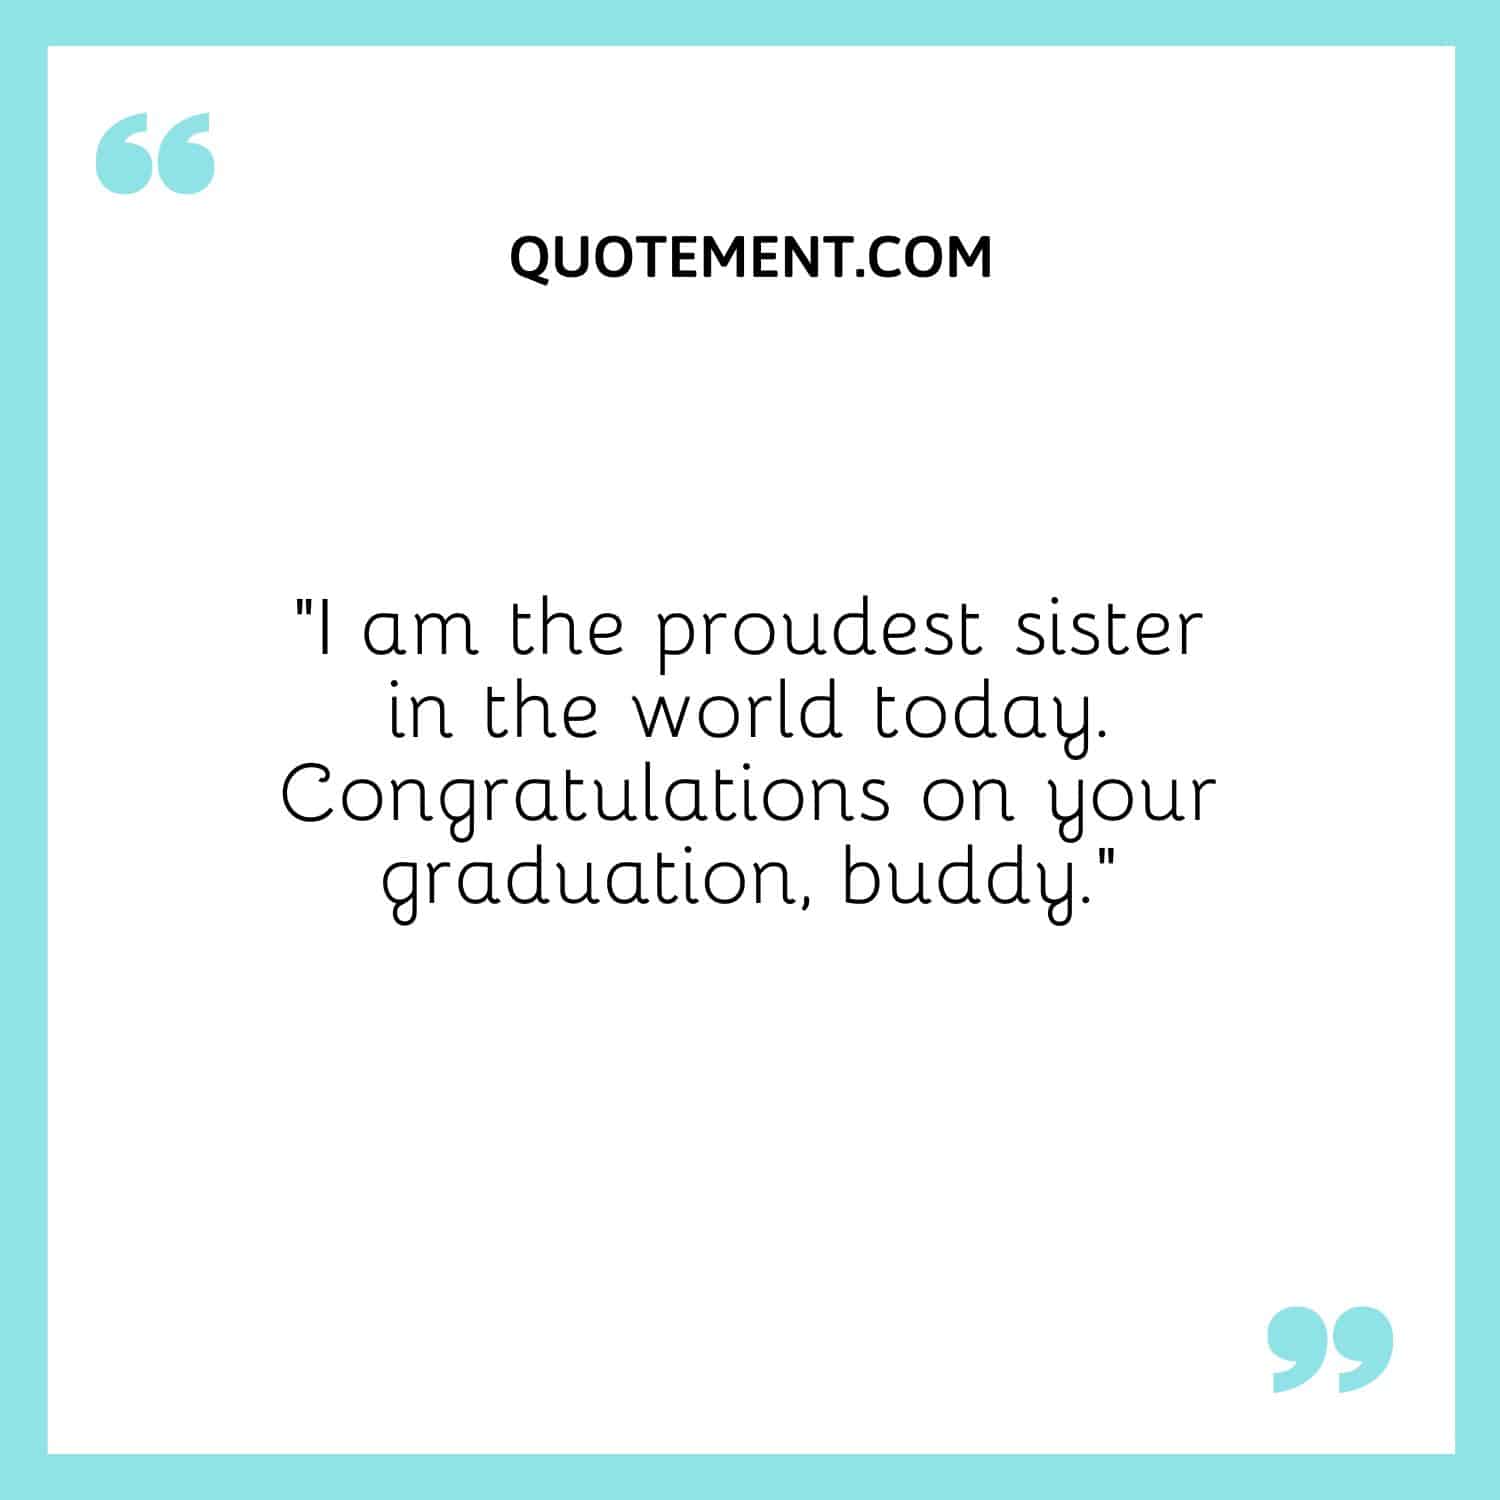 “I am the proudest sister in the world today. Congratulations on your graduation, buddy.”